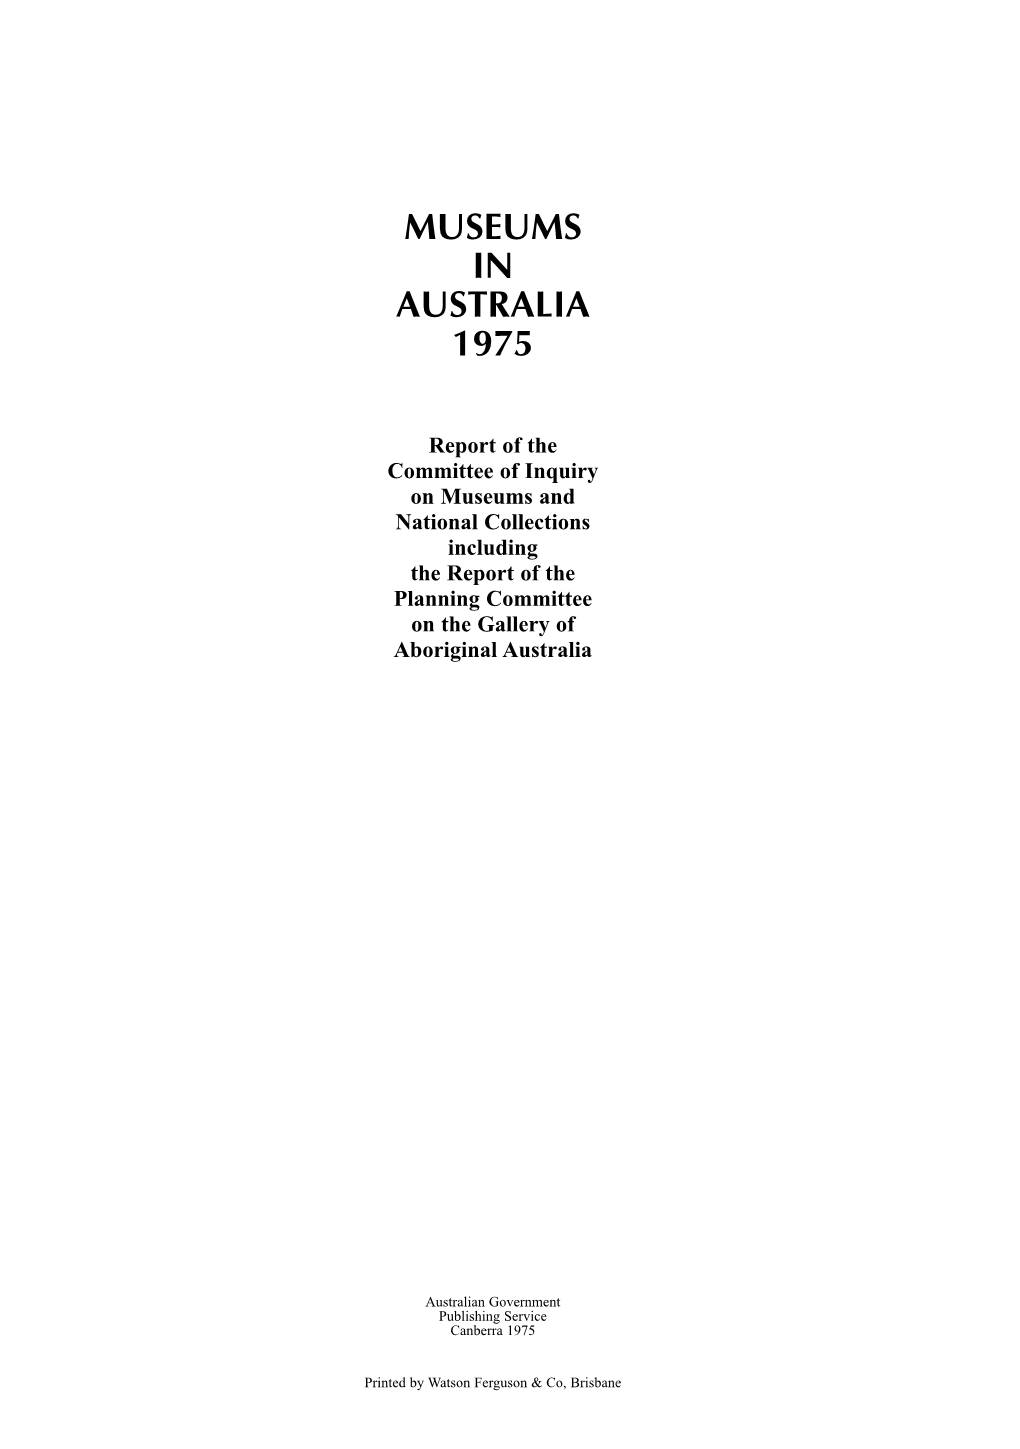 Museums in Australia 1975